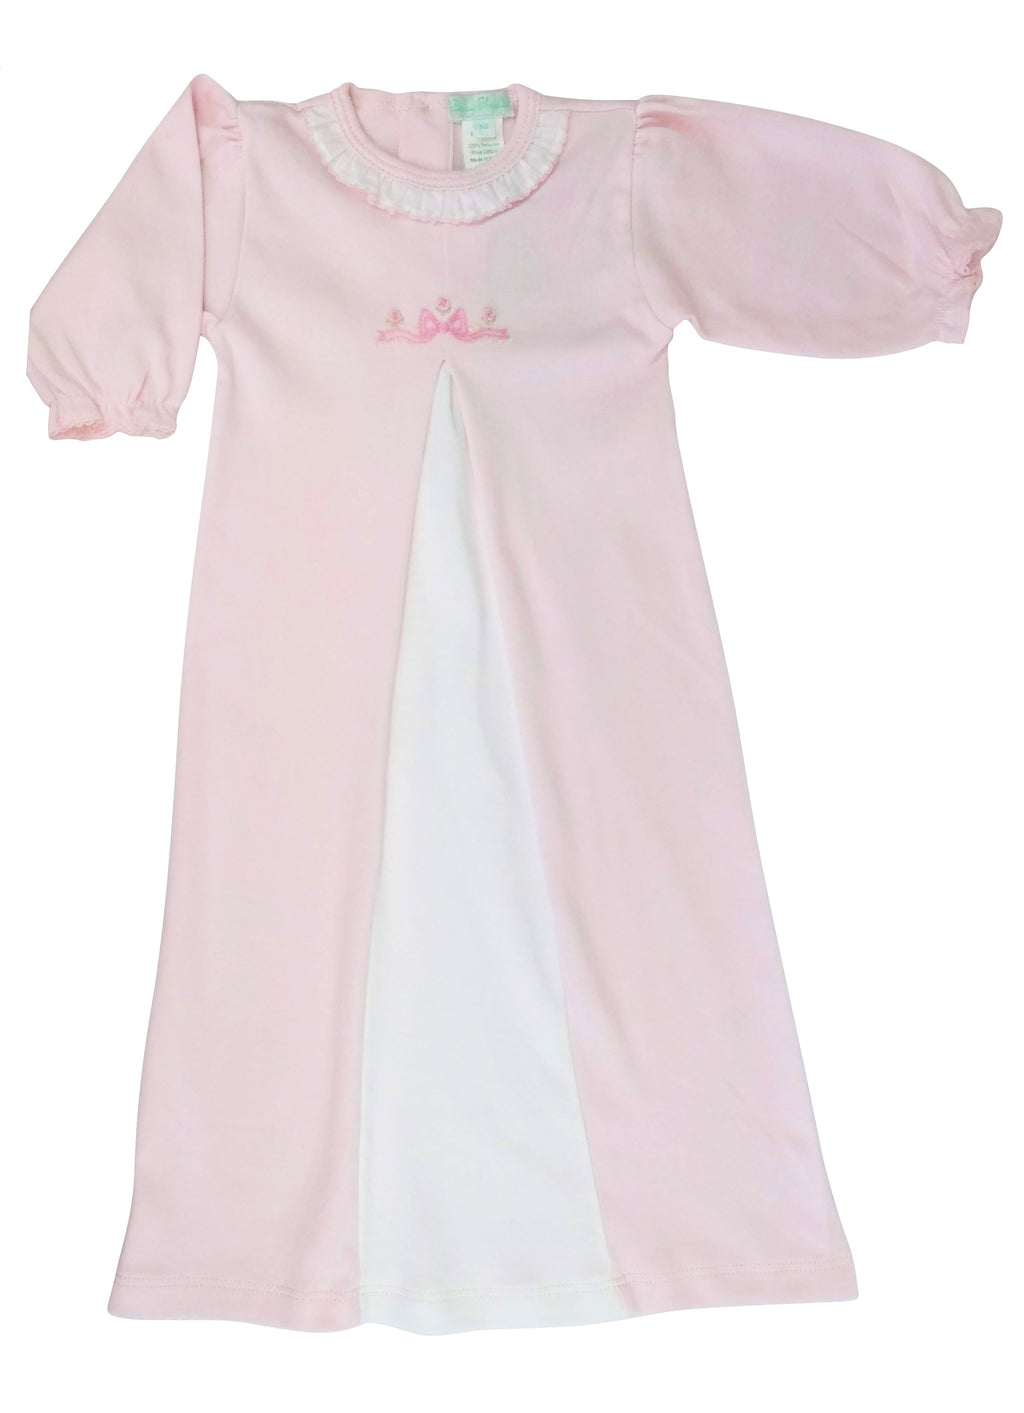 Baby Girl's Pink Bow Daygown - Little Threads Inc. Children's Clothing